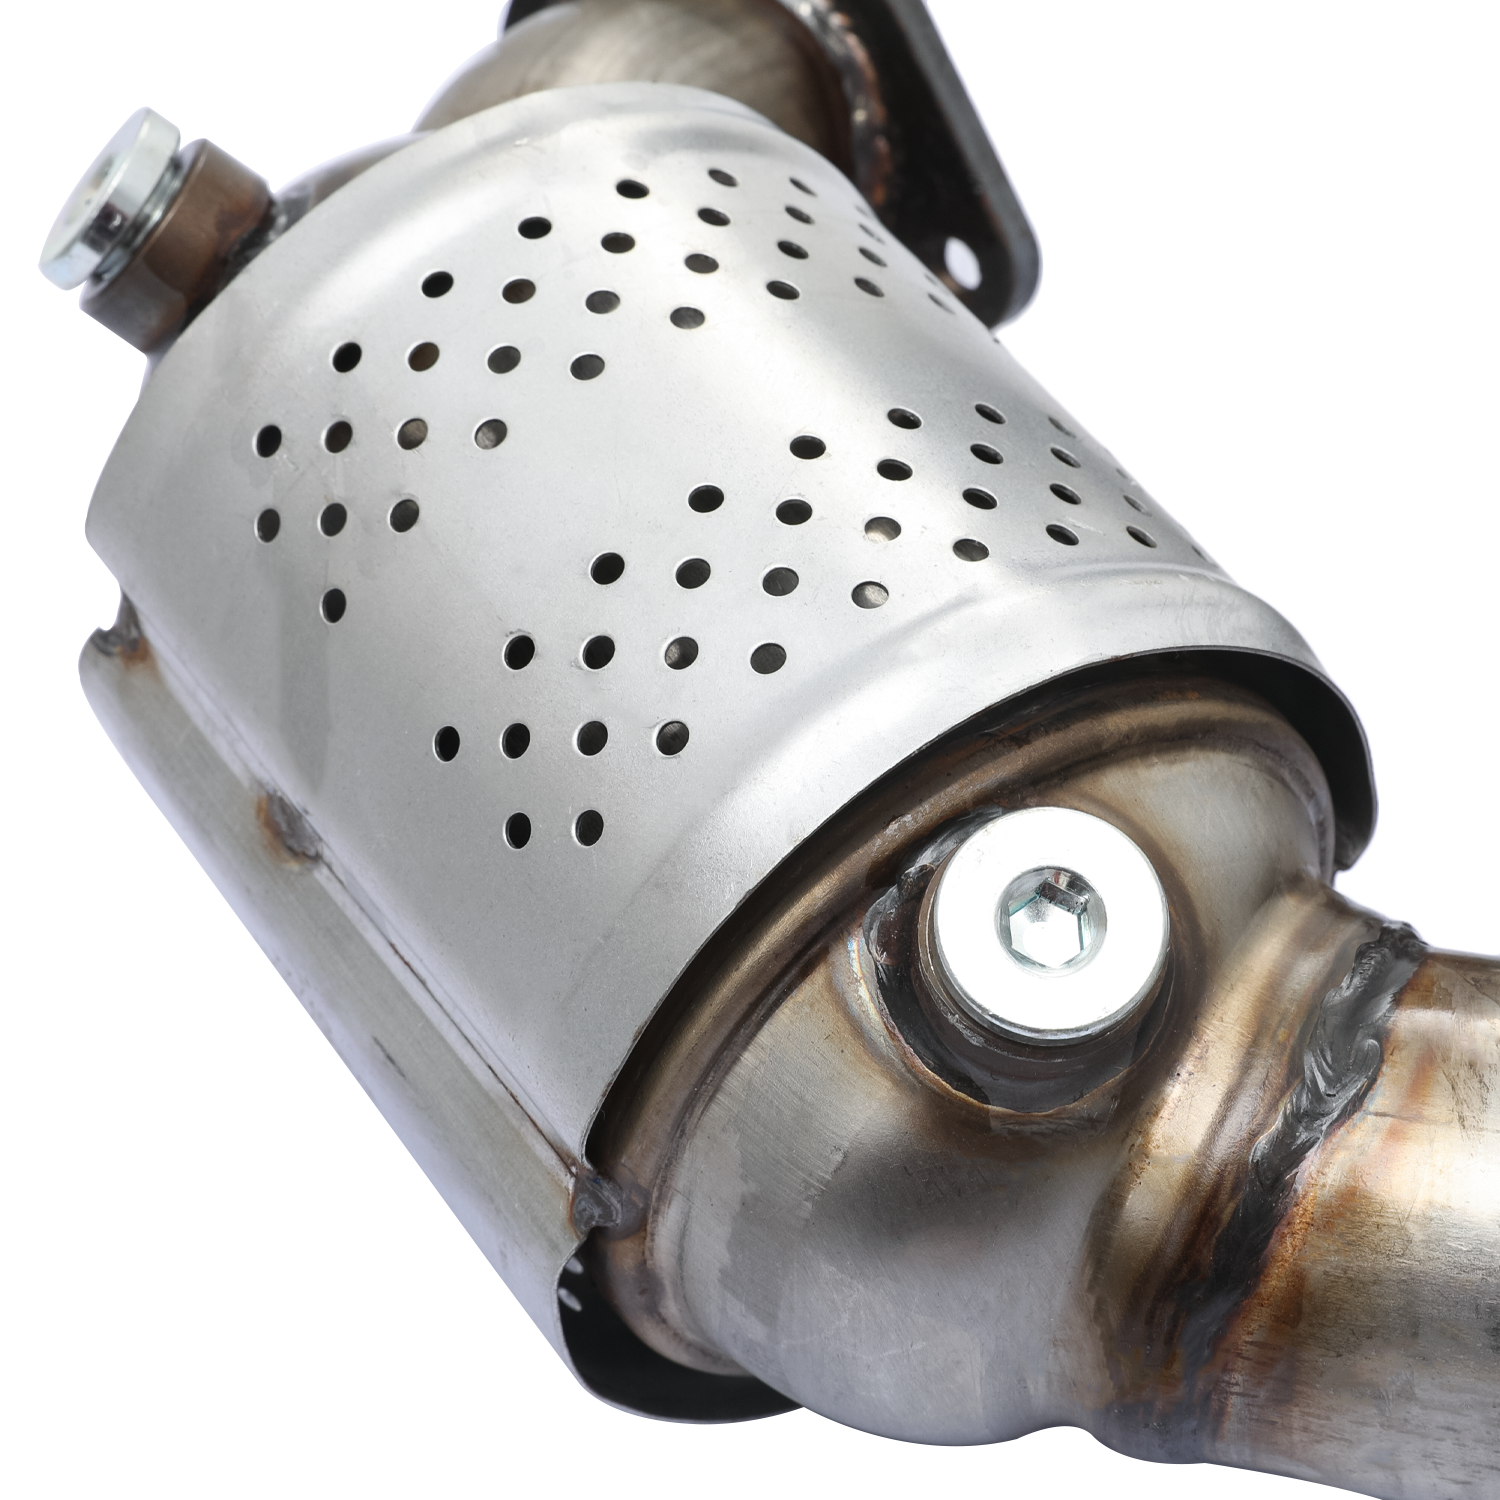 OE Replacement Catalytic Converter<br>06-11 Subaru Impreza (Sport), Legacy, Outback